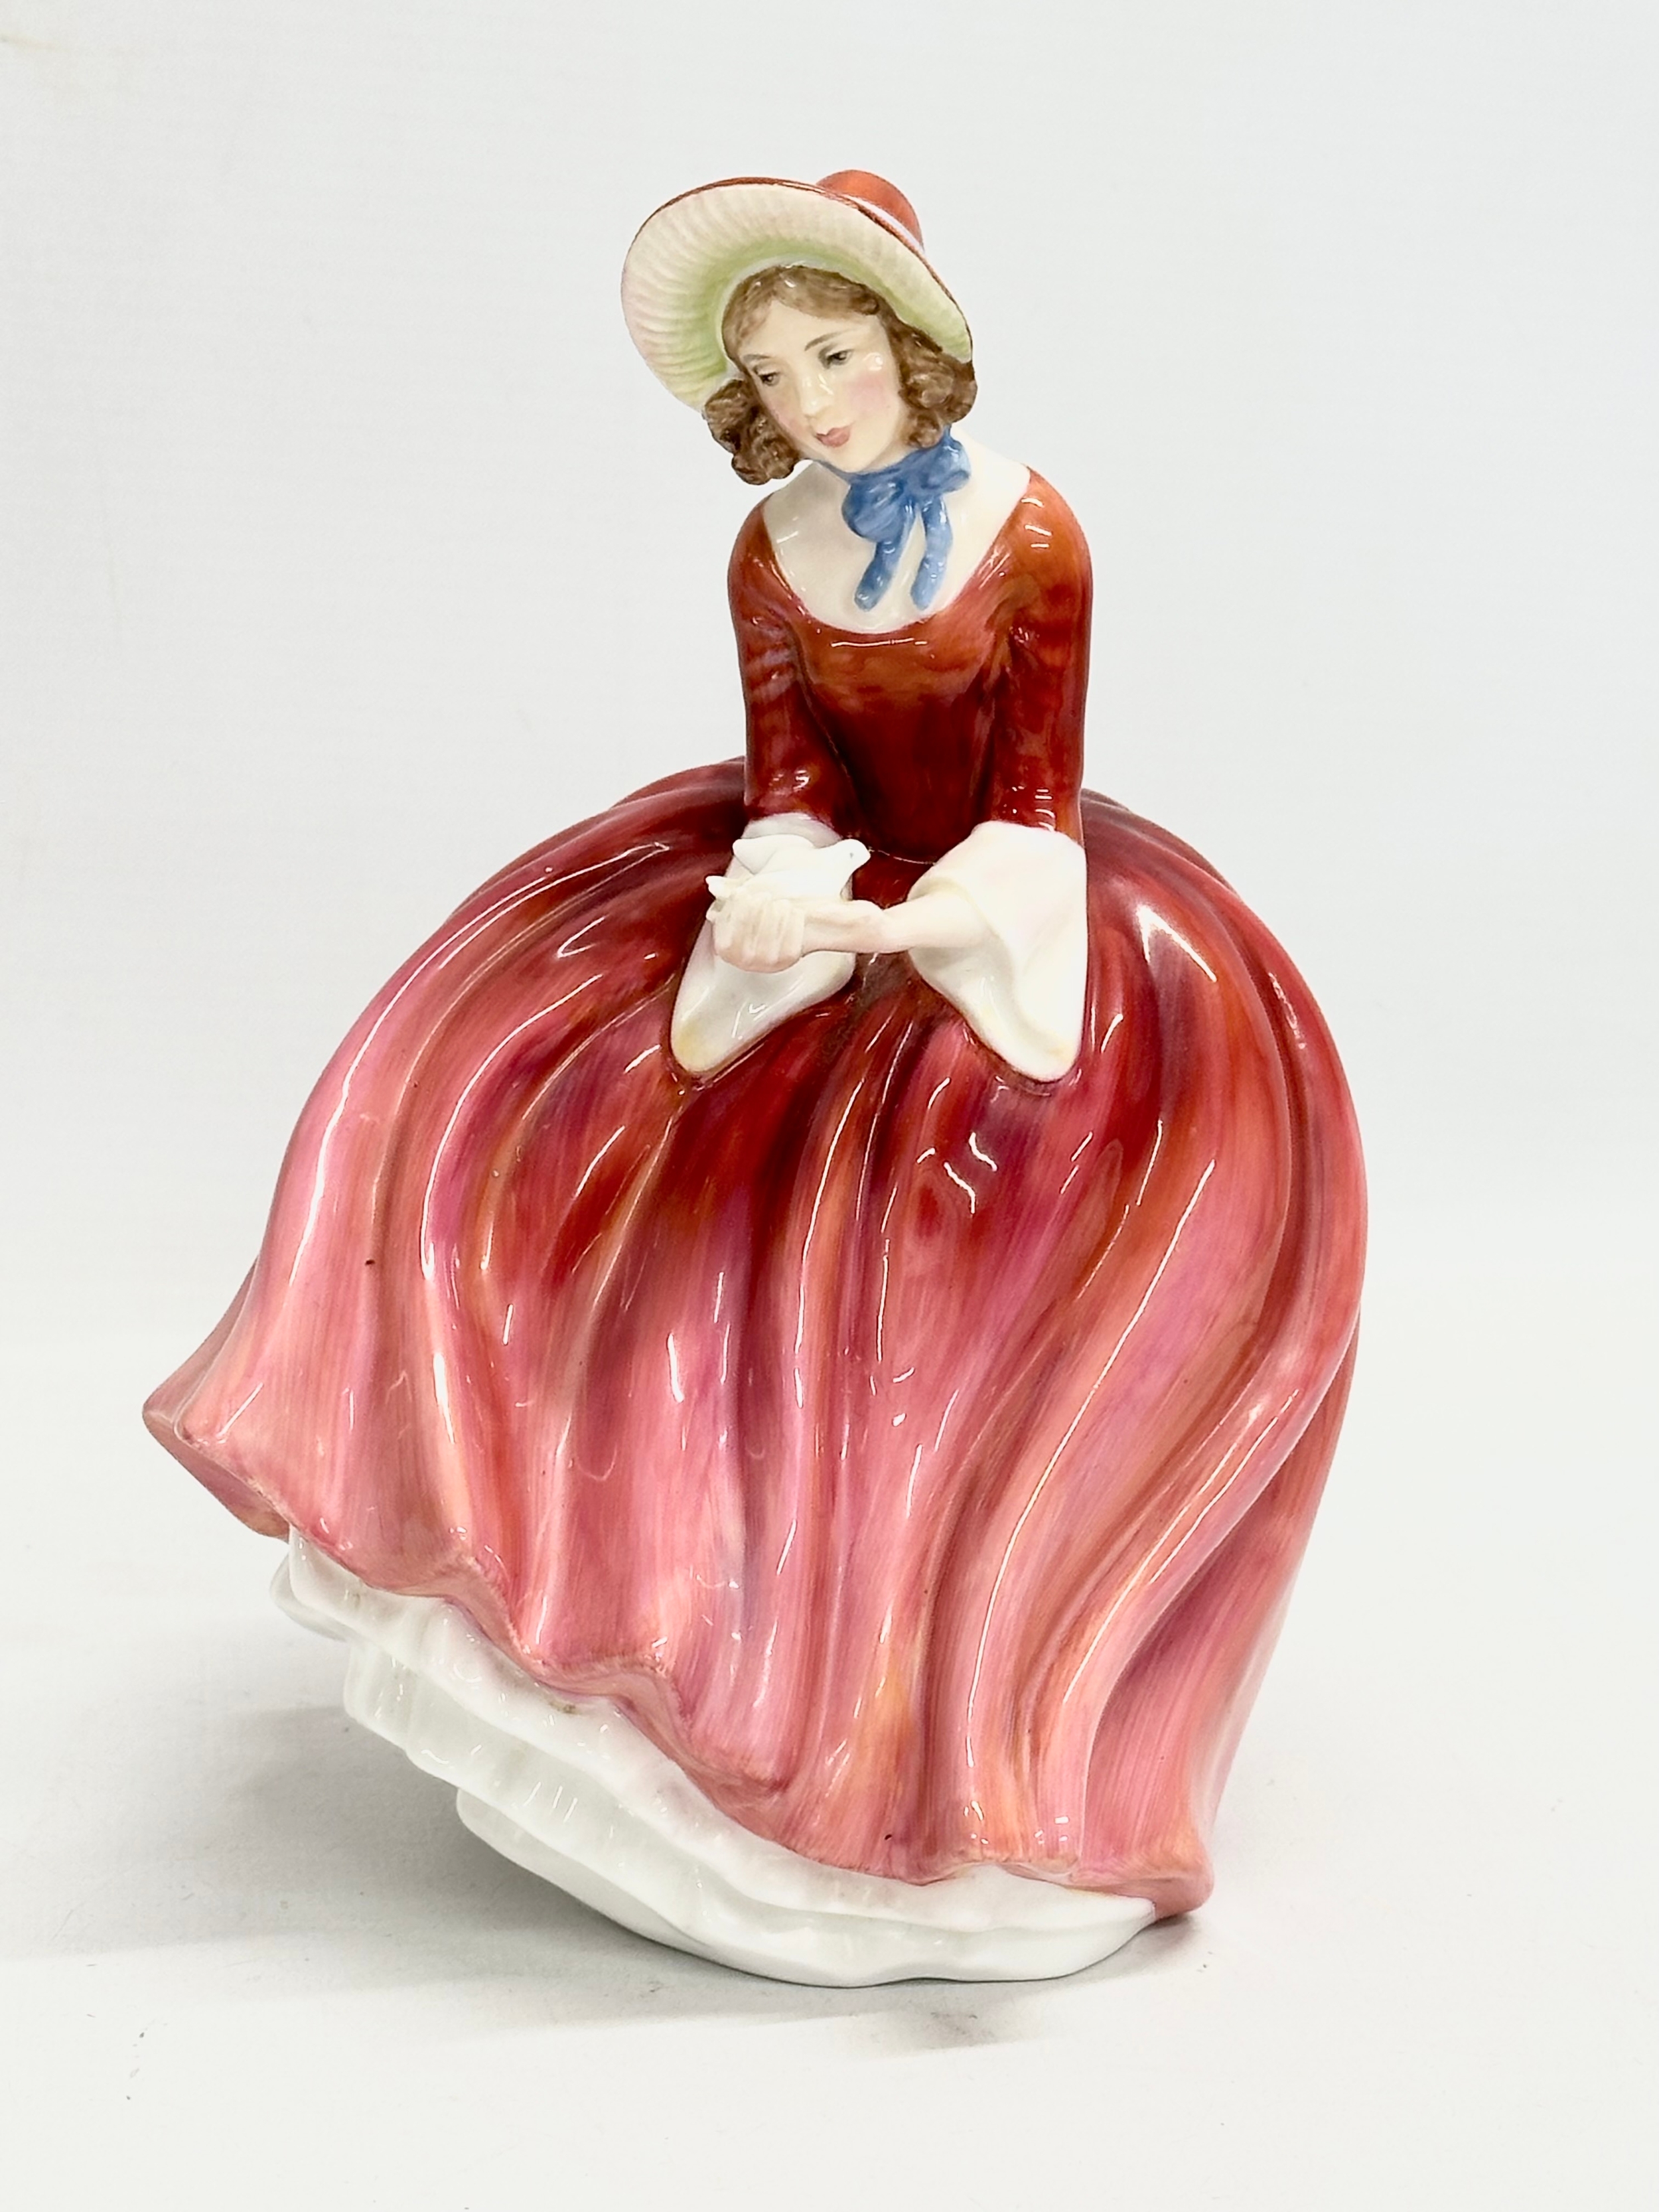 4 Royal Doulton figurines. Her Ladyship RN 842480. Top O’ The Hill, Denise, Pretty Ladies - Image 2 of 9